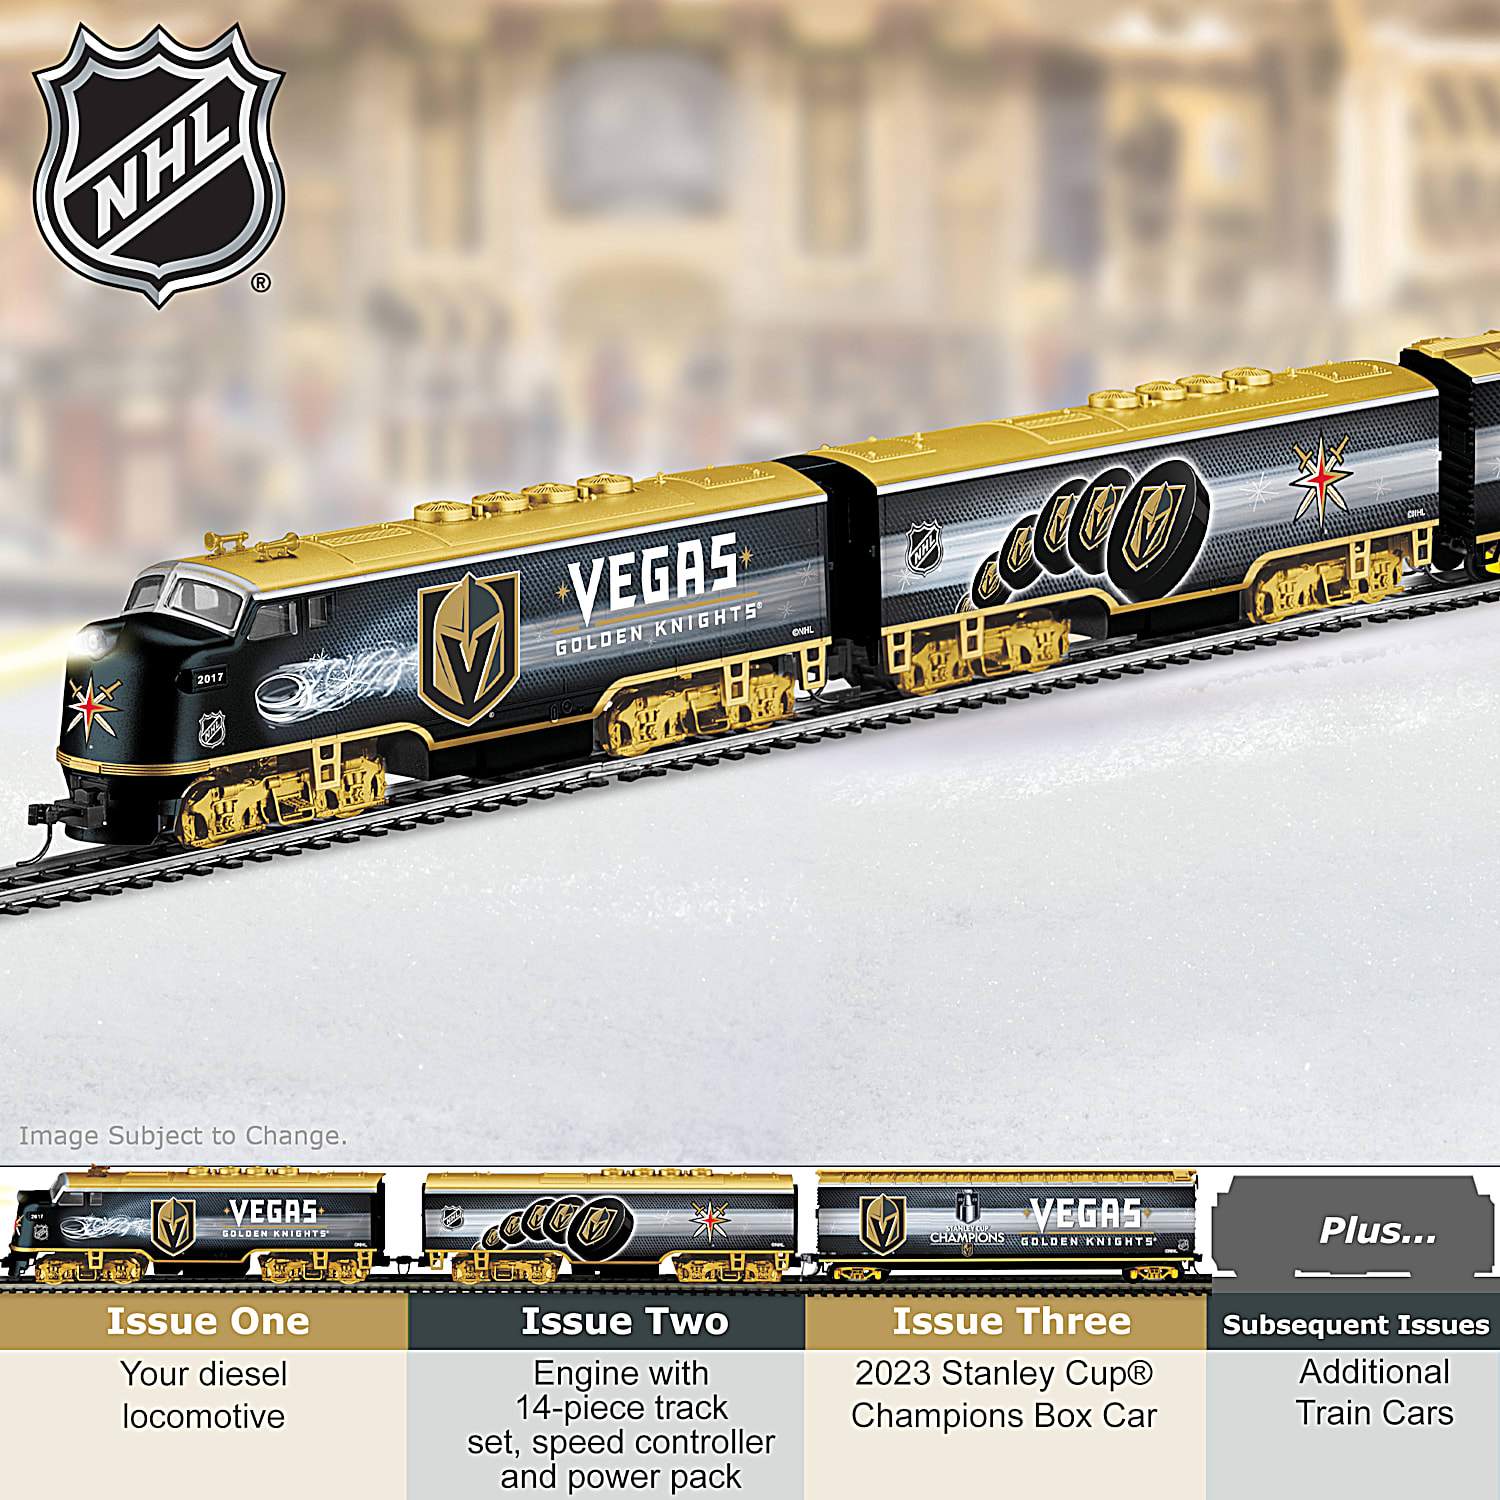 My Collection 2023 Edition: Vegas Golden Knights 